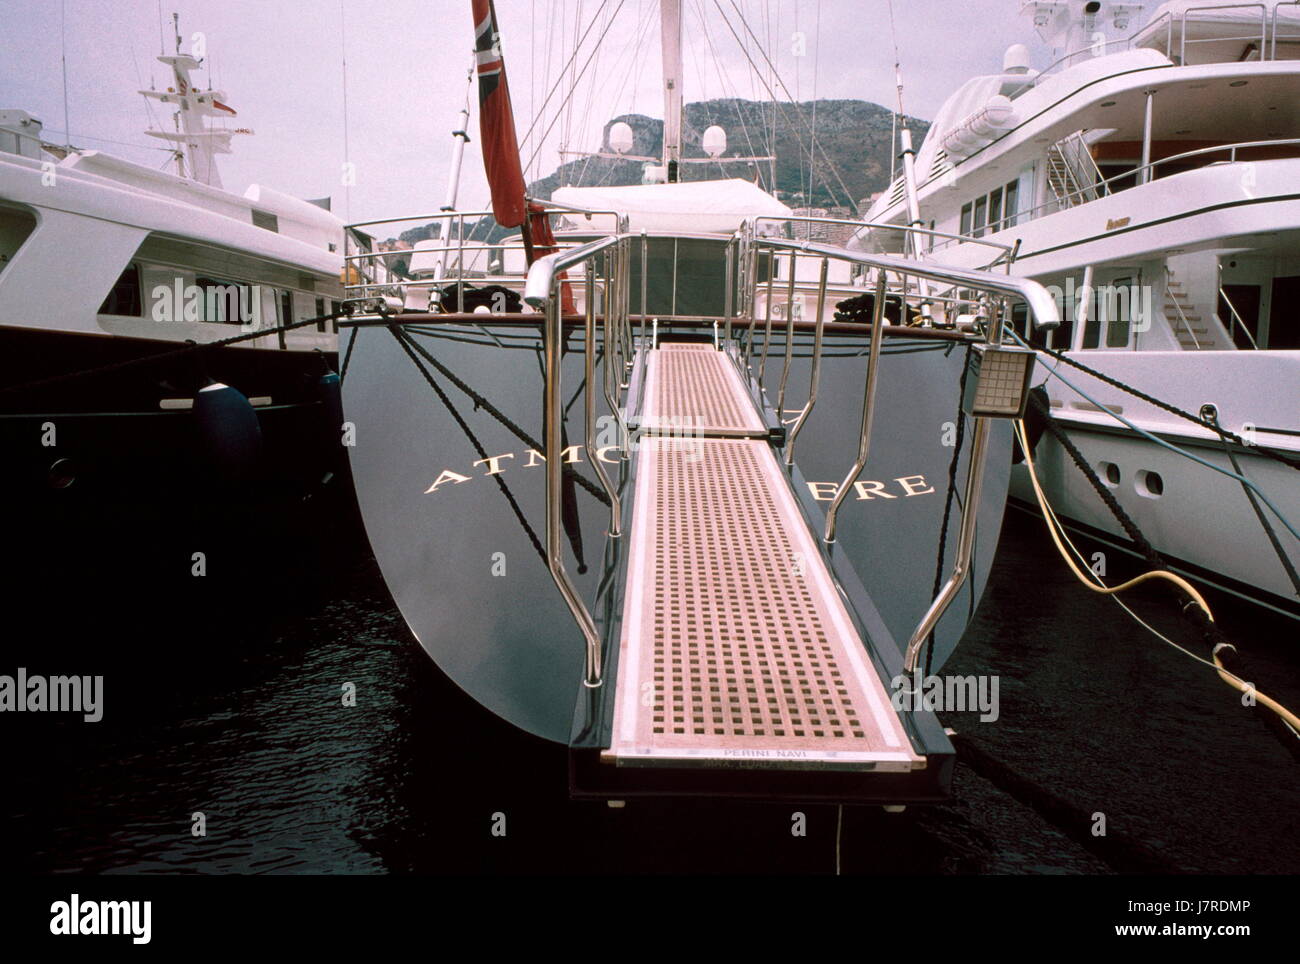 AJAXNETPHOTO. MONTE CARLO, MONACO. - GANGWAY - WOODEN TEAK GRATED BOARDING GANGWAY FOR A SUPERYACHT MOORED IN THE PORT. PHOTO:JONATHAN EASTLAND/AJAX REF:61501 1017 Stock Photo